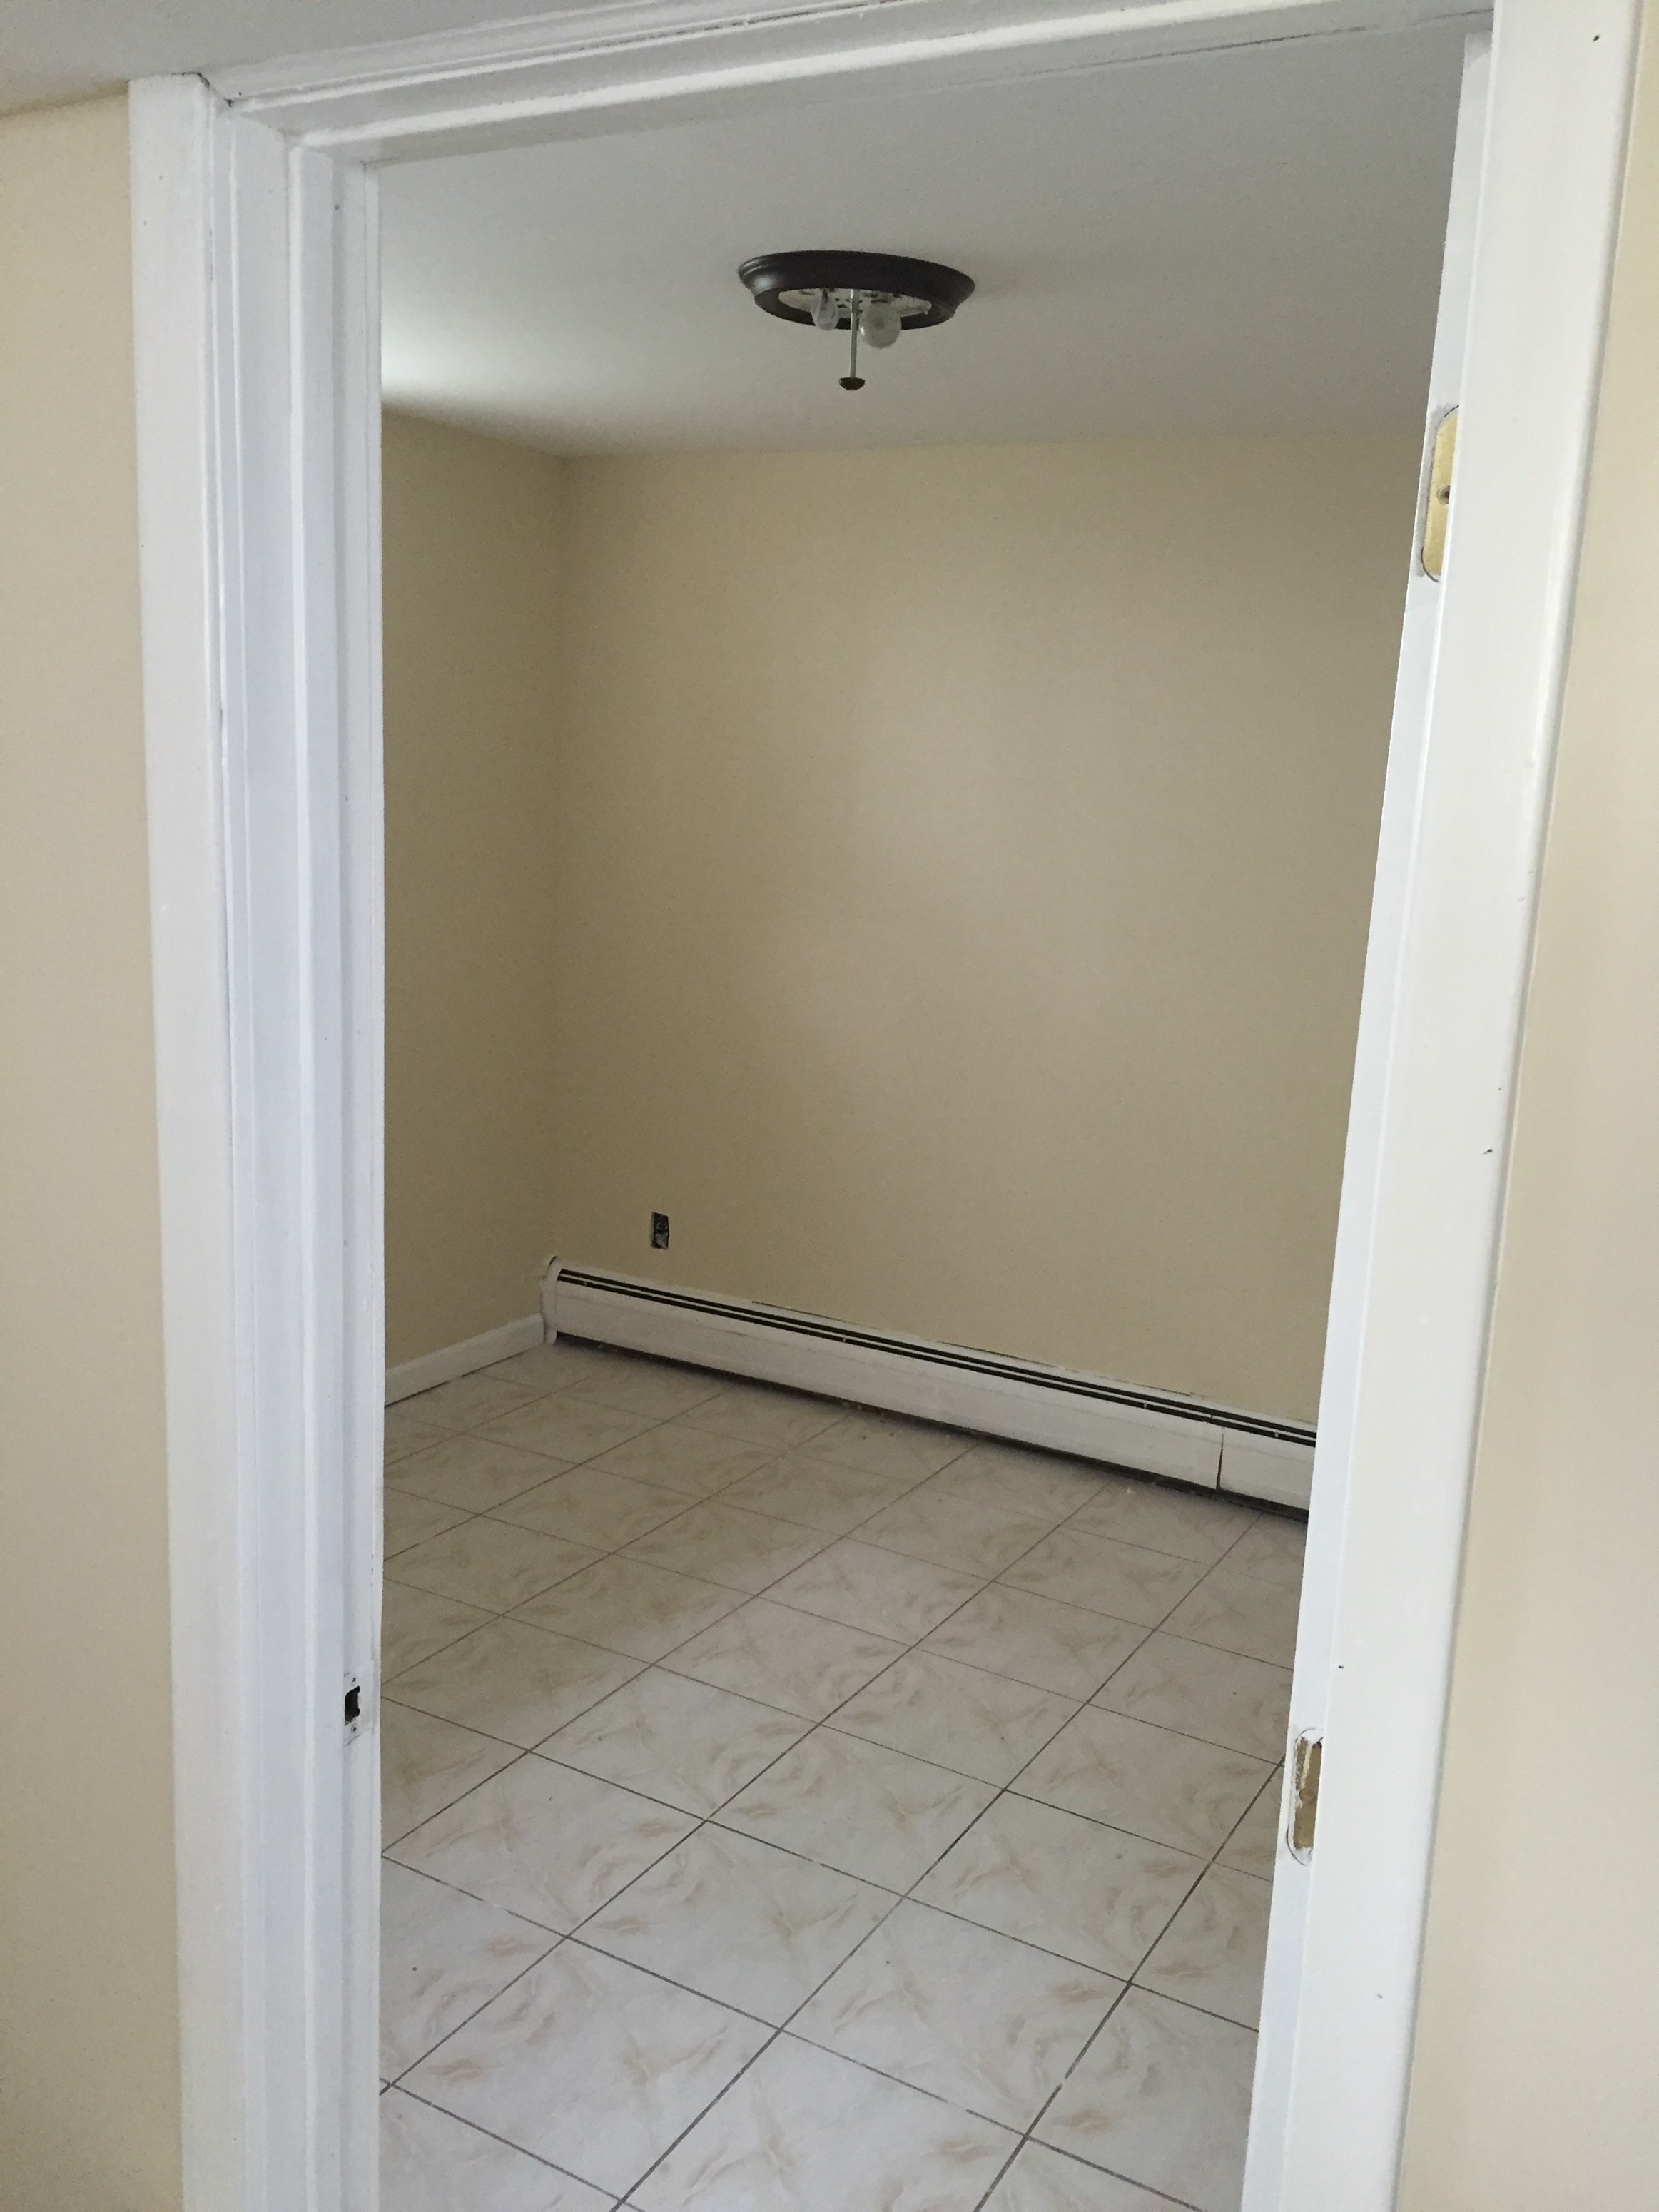 jersey city heights apartments for rent craigslist